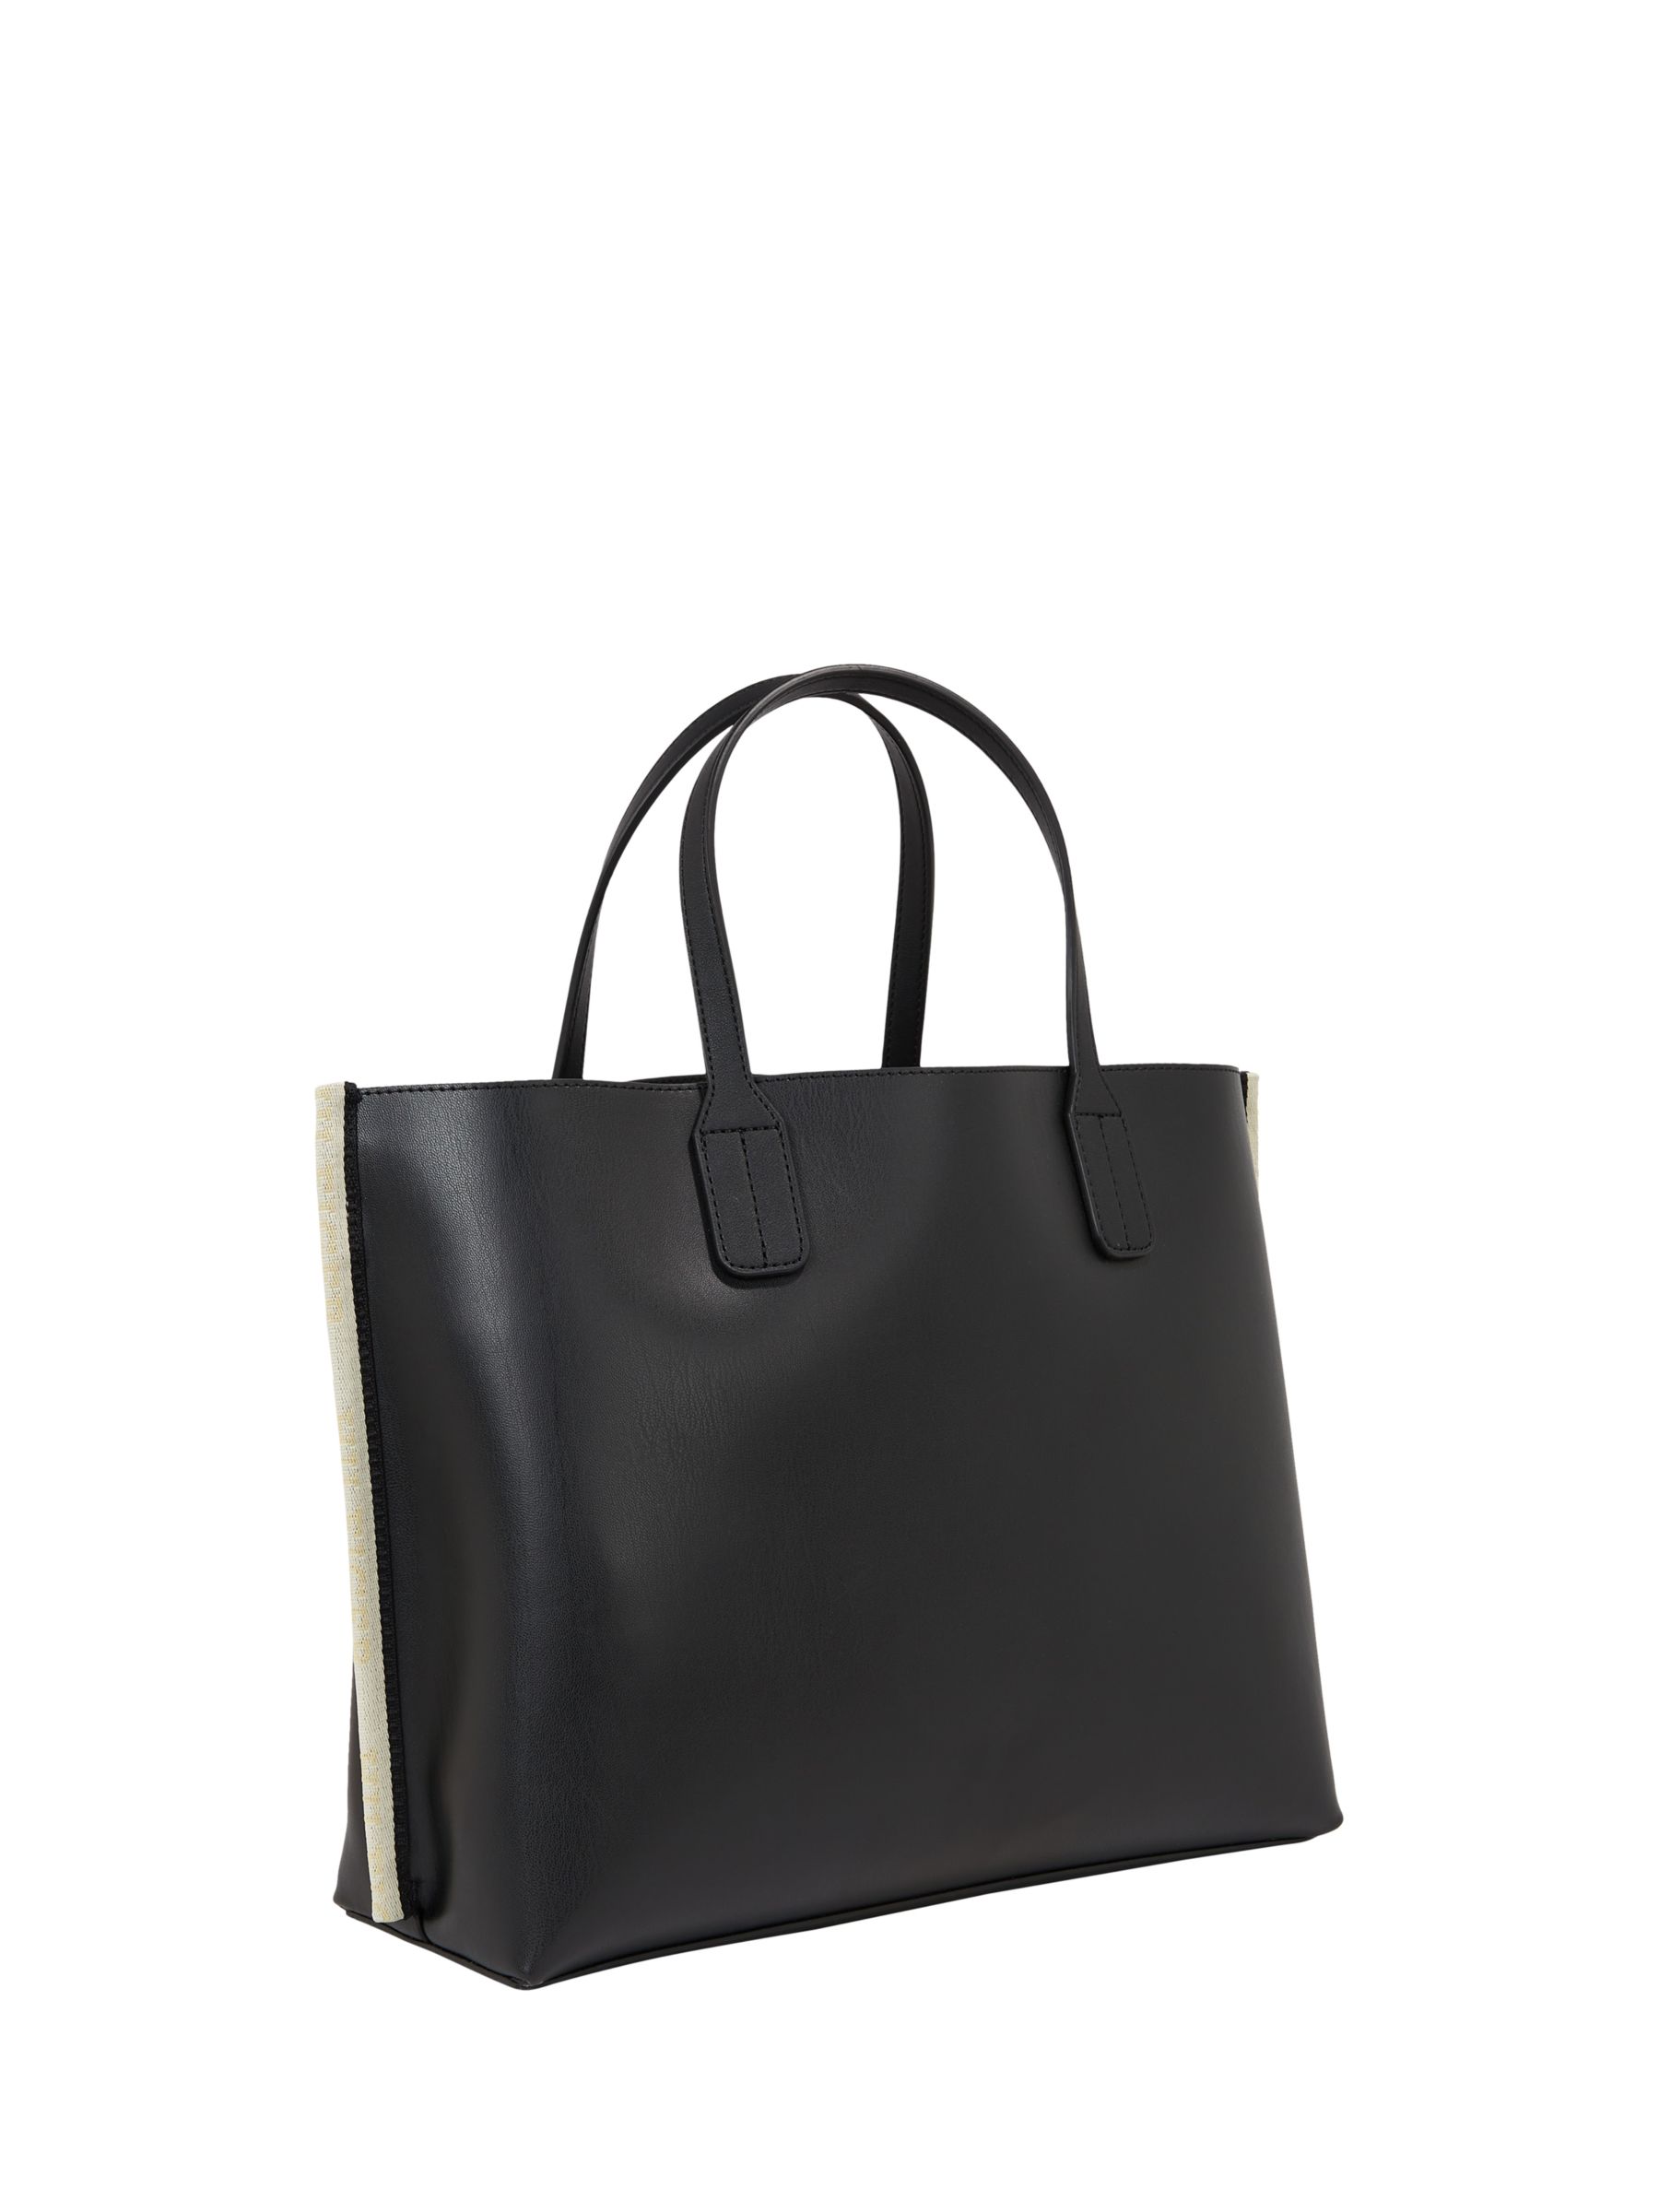 Tommy Hilfiger Iconic Tommy Tote Bag, Black at John Lewis & Partners